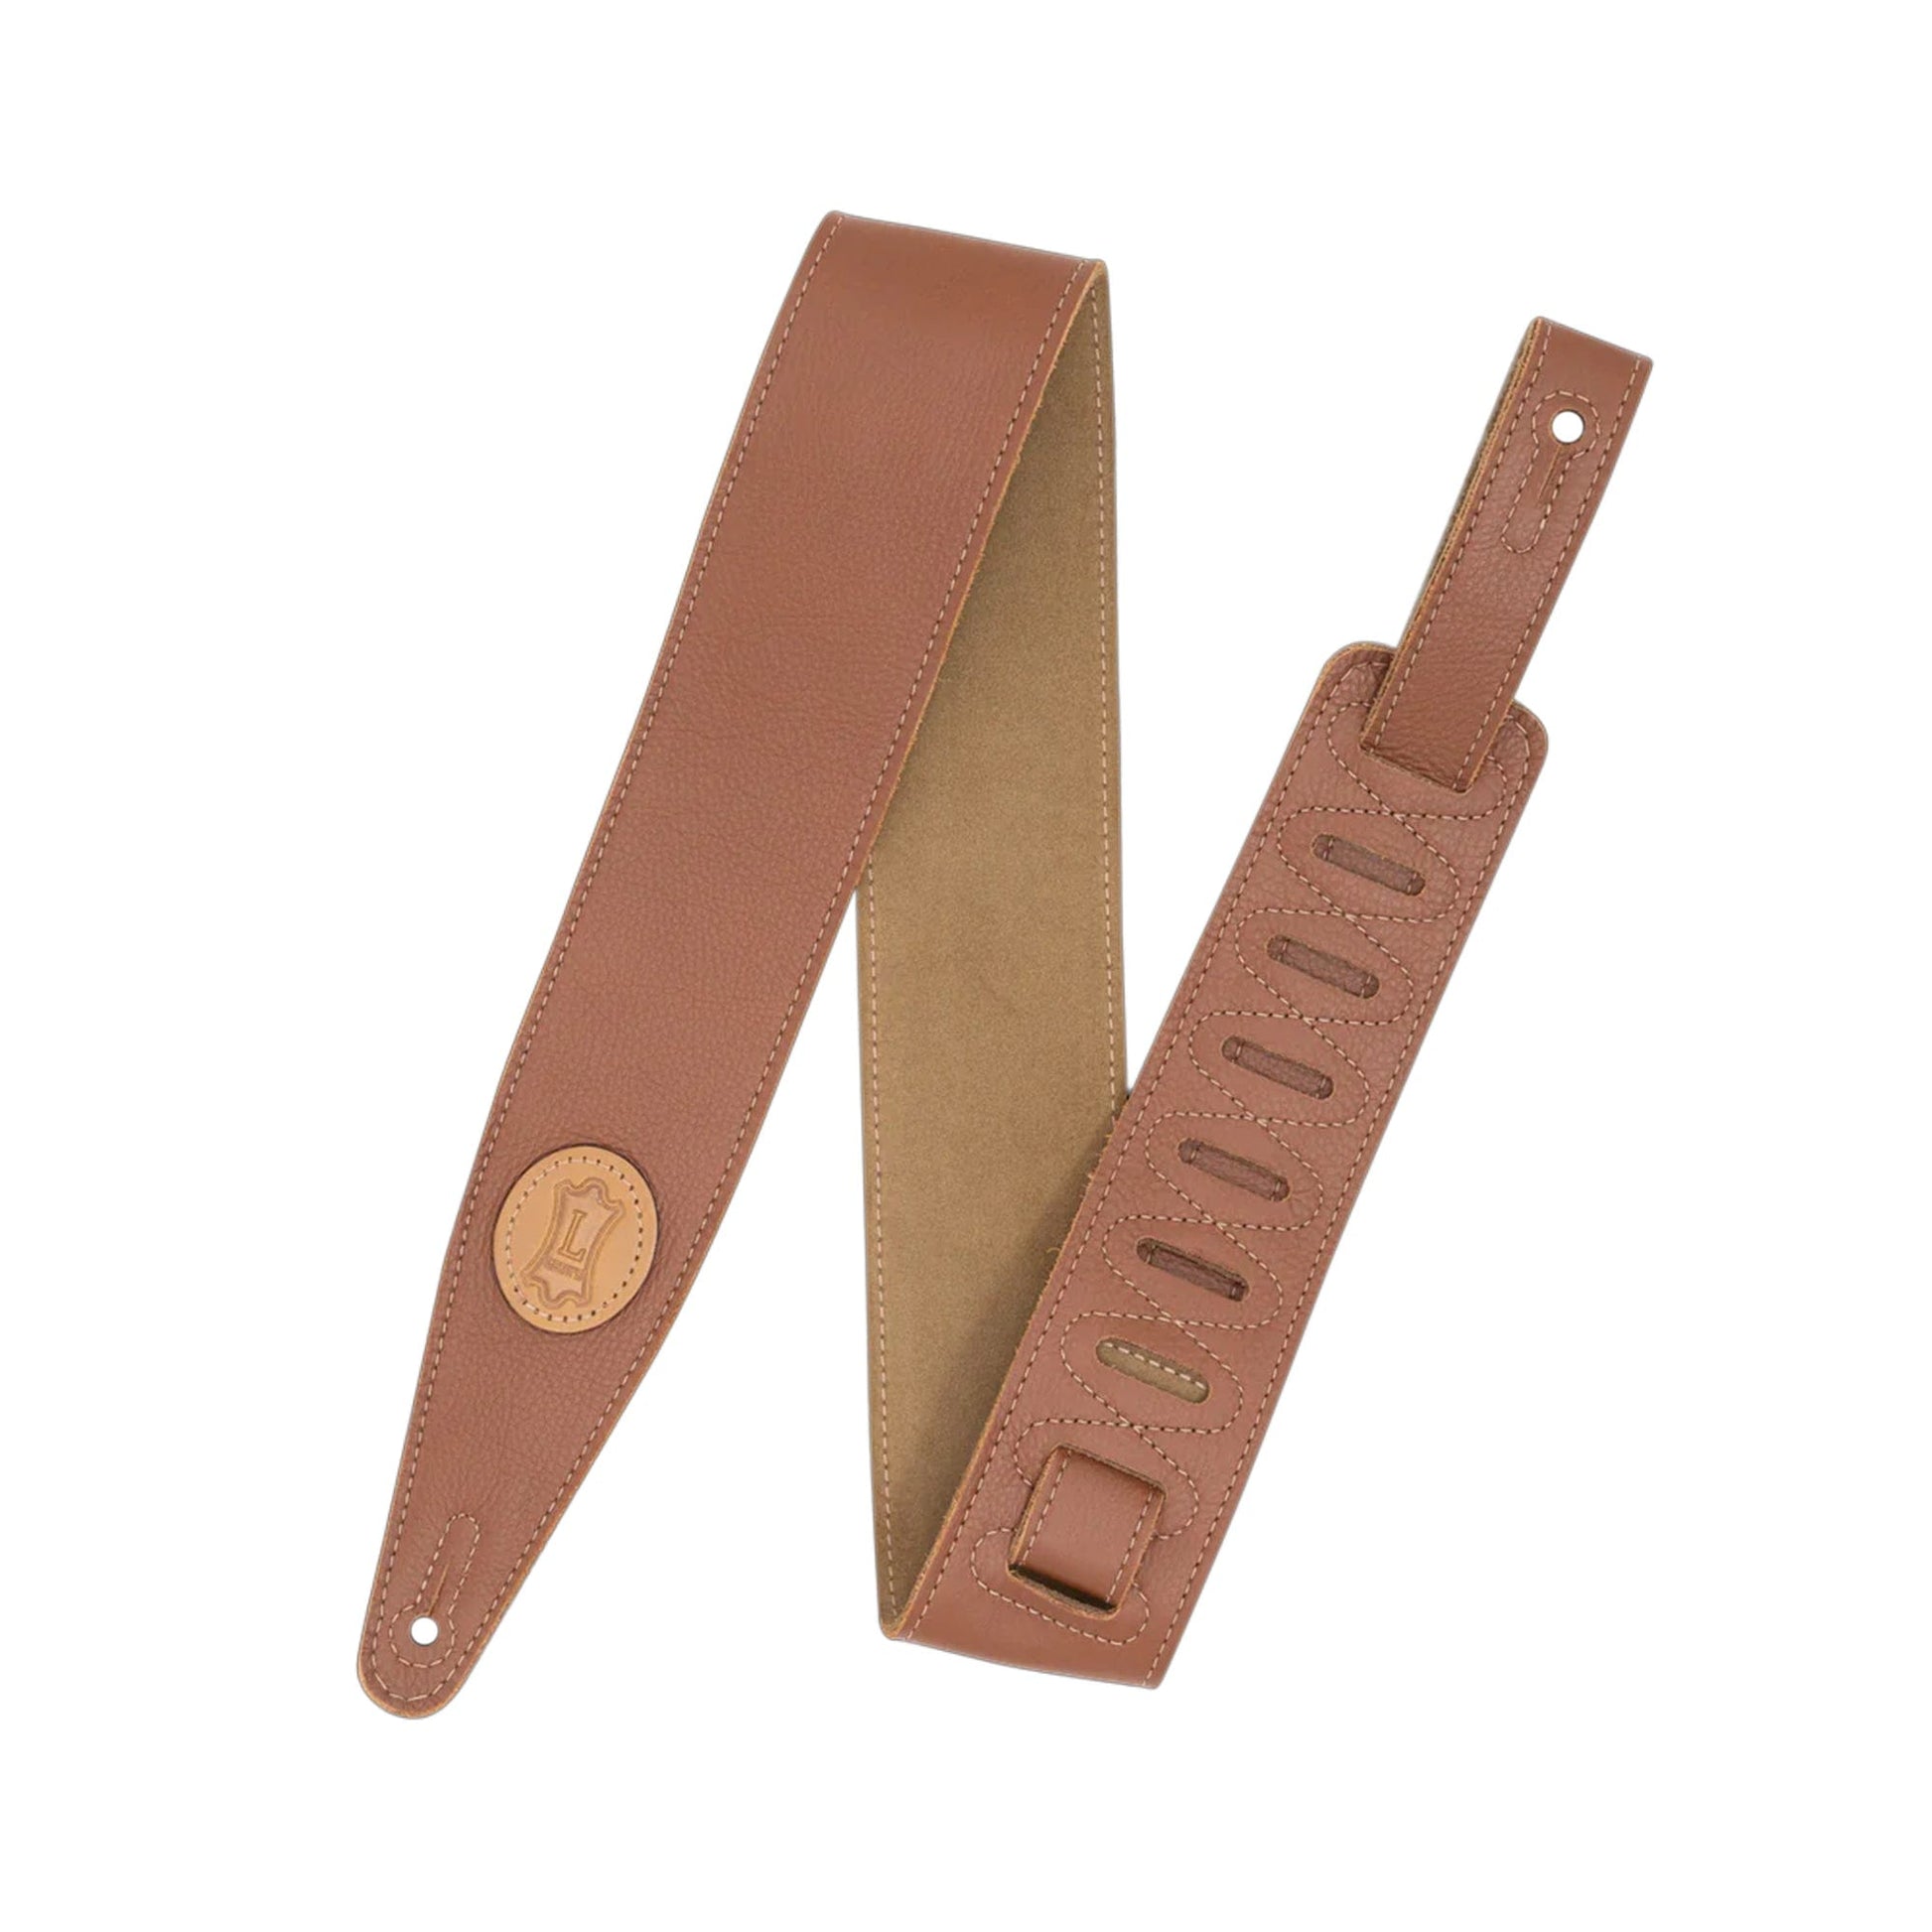 Levy's 2.5" Garment Leather Strap Tan w/Sand Suede Backing Accessories / Straps